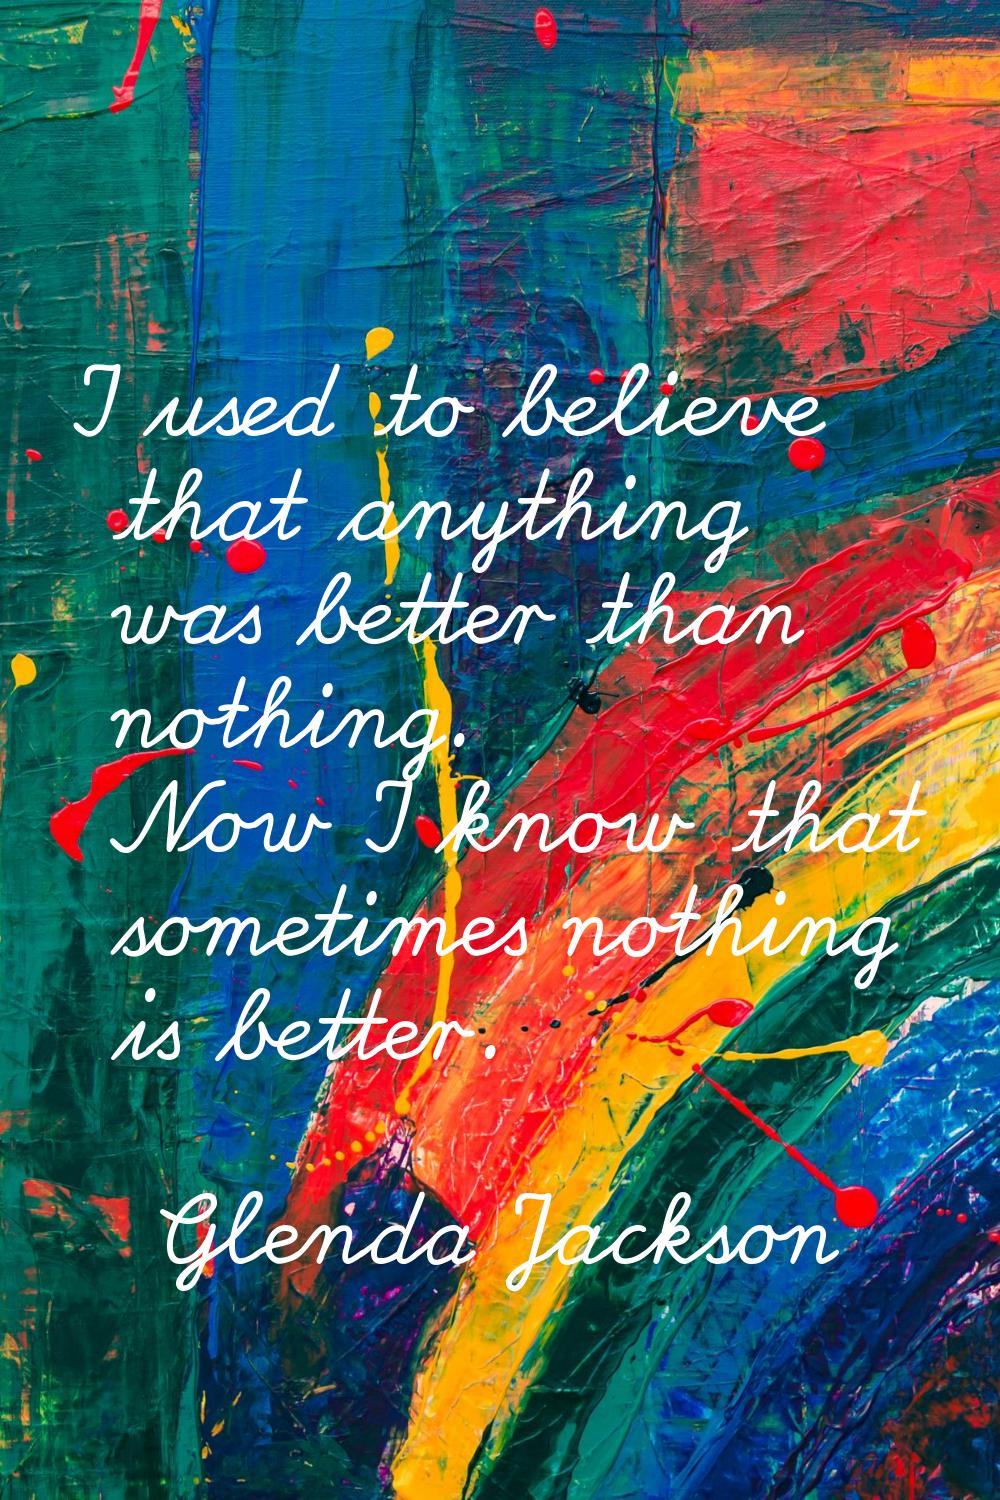 I used to believe that anything was better than nothing. Now I know that sometimes nothing is bette